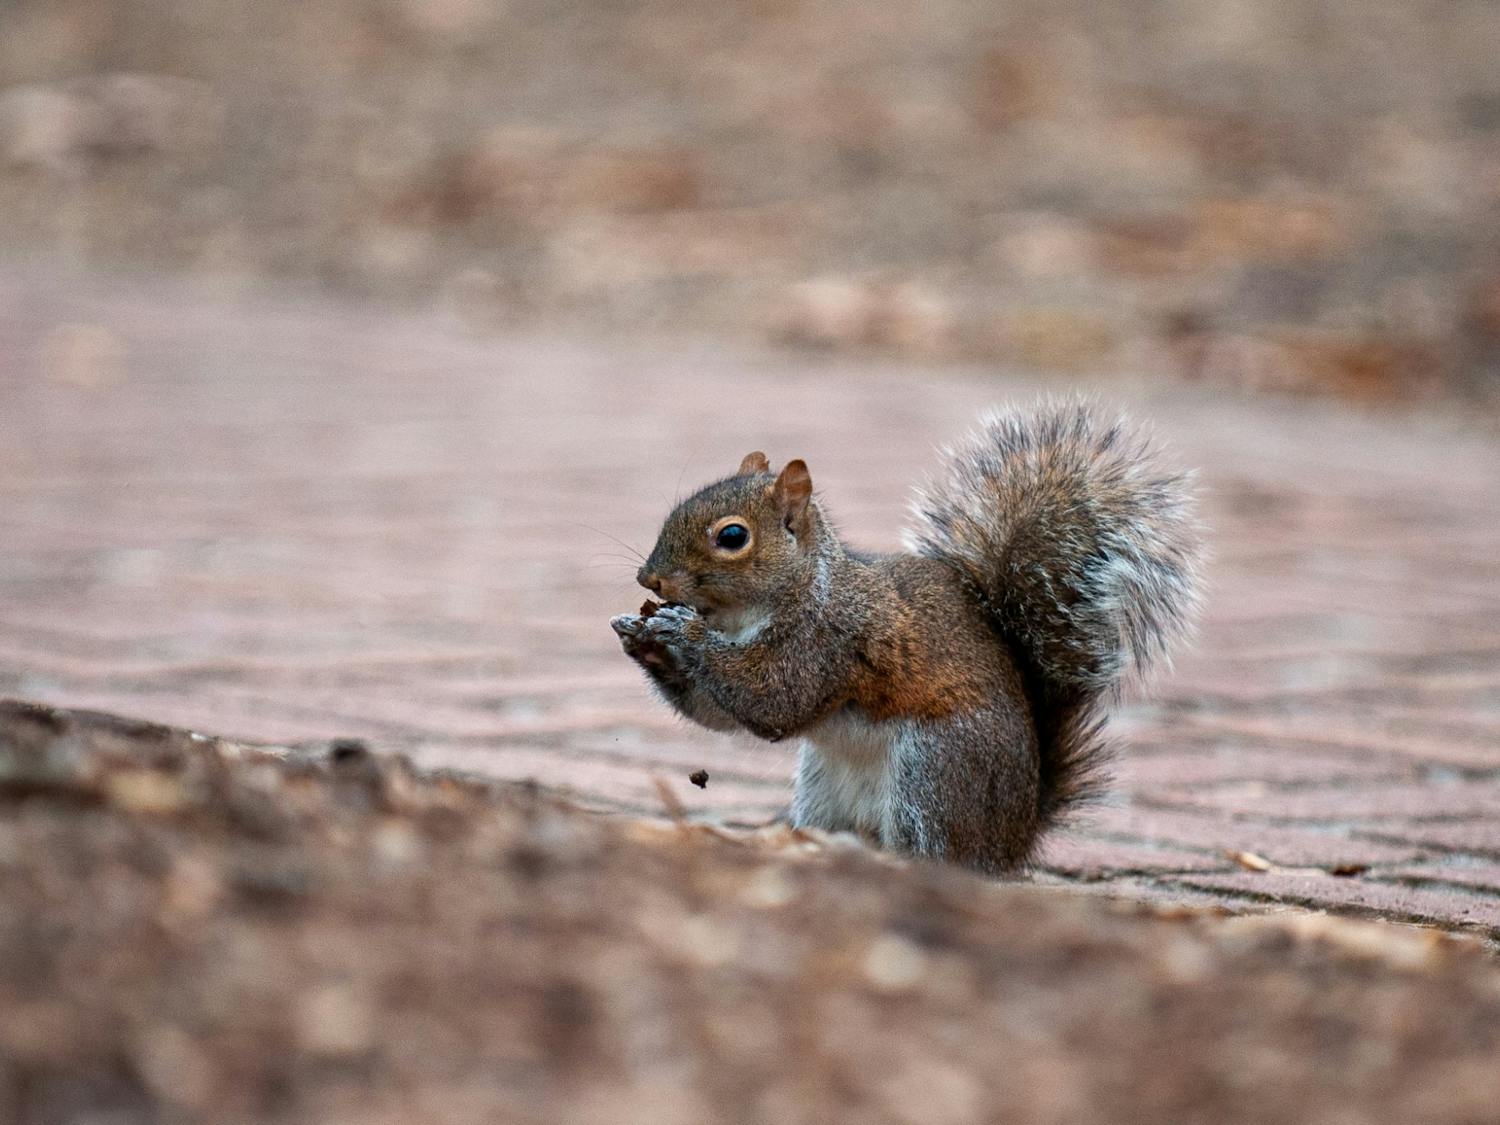 A squirrel sits outside on the bricks located outside of Russell House on Feb. 6, 2022. The Carolina campus is home to several animals including birds, squirrels and cats.